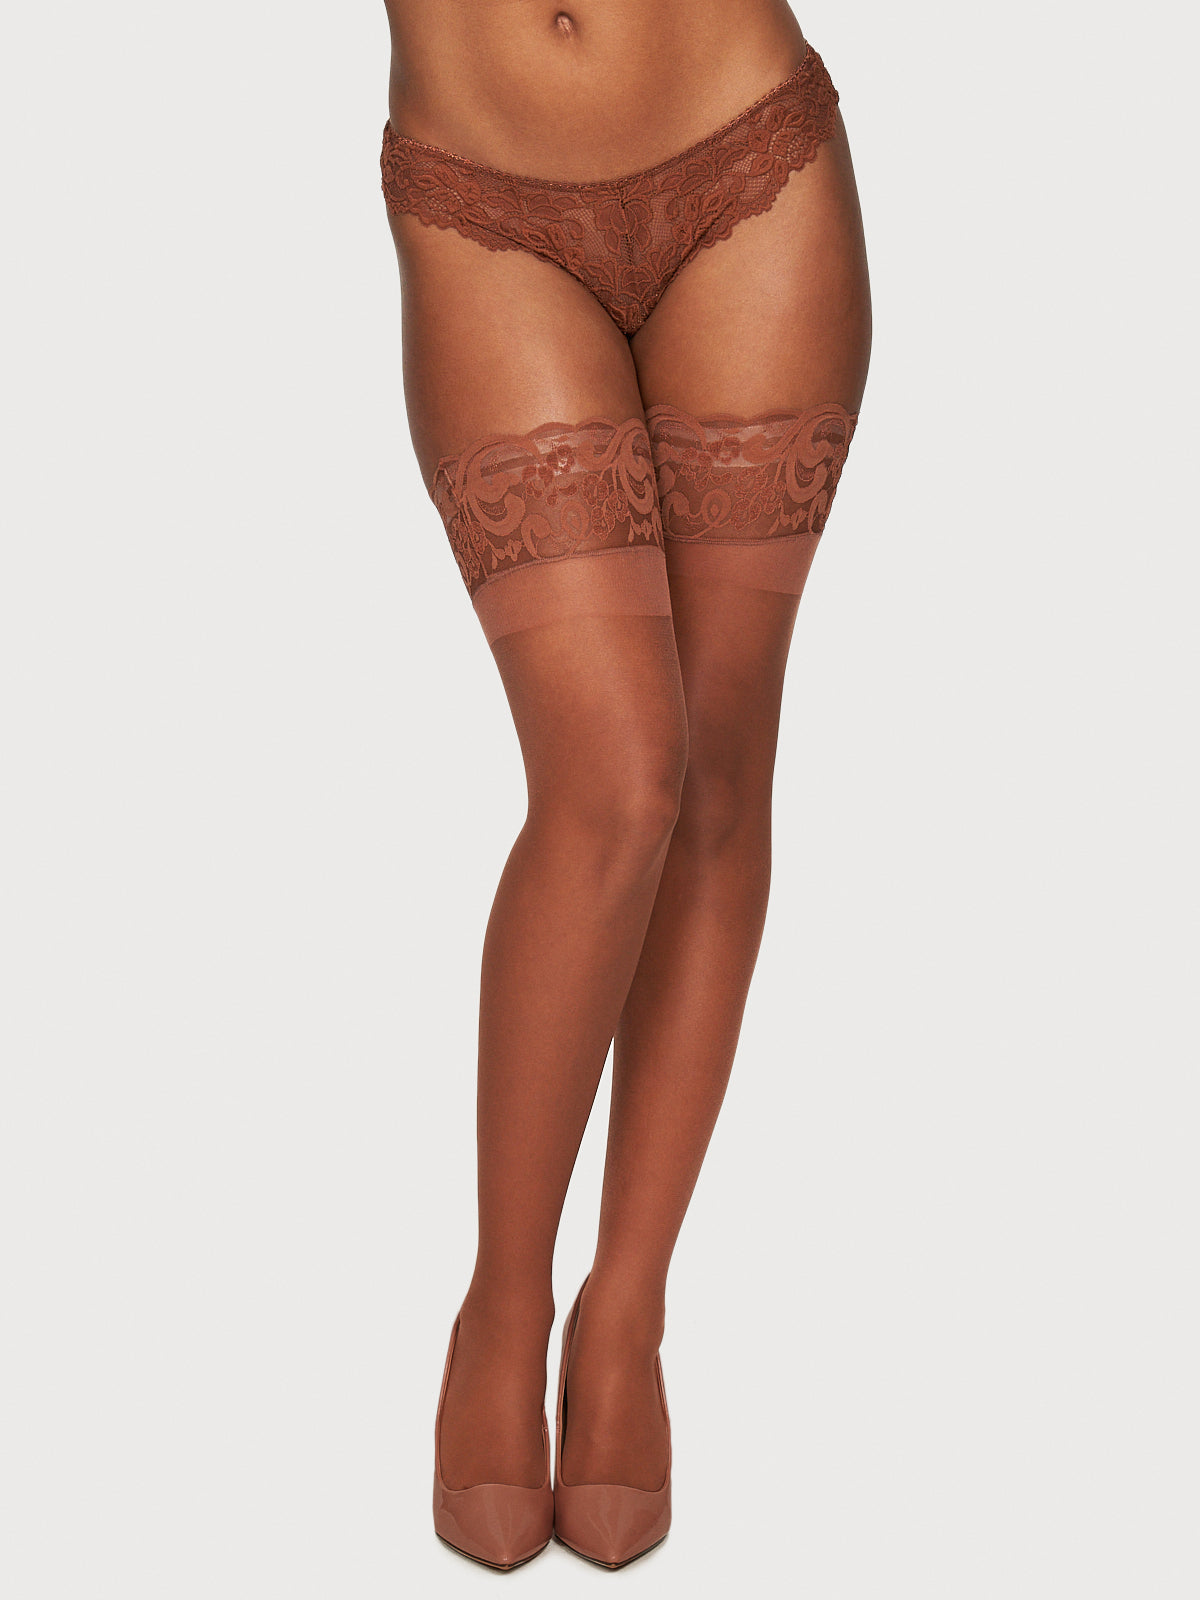 Cassie Lace Stay Up Thigh Highs - Fredericks of Hollywood